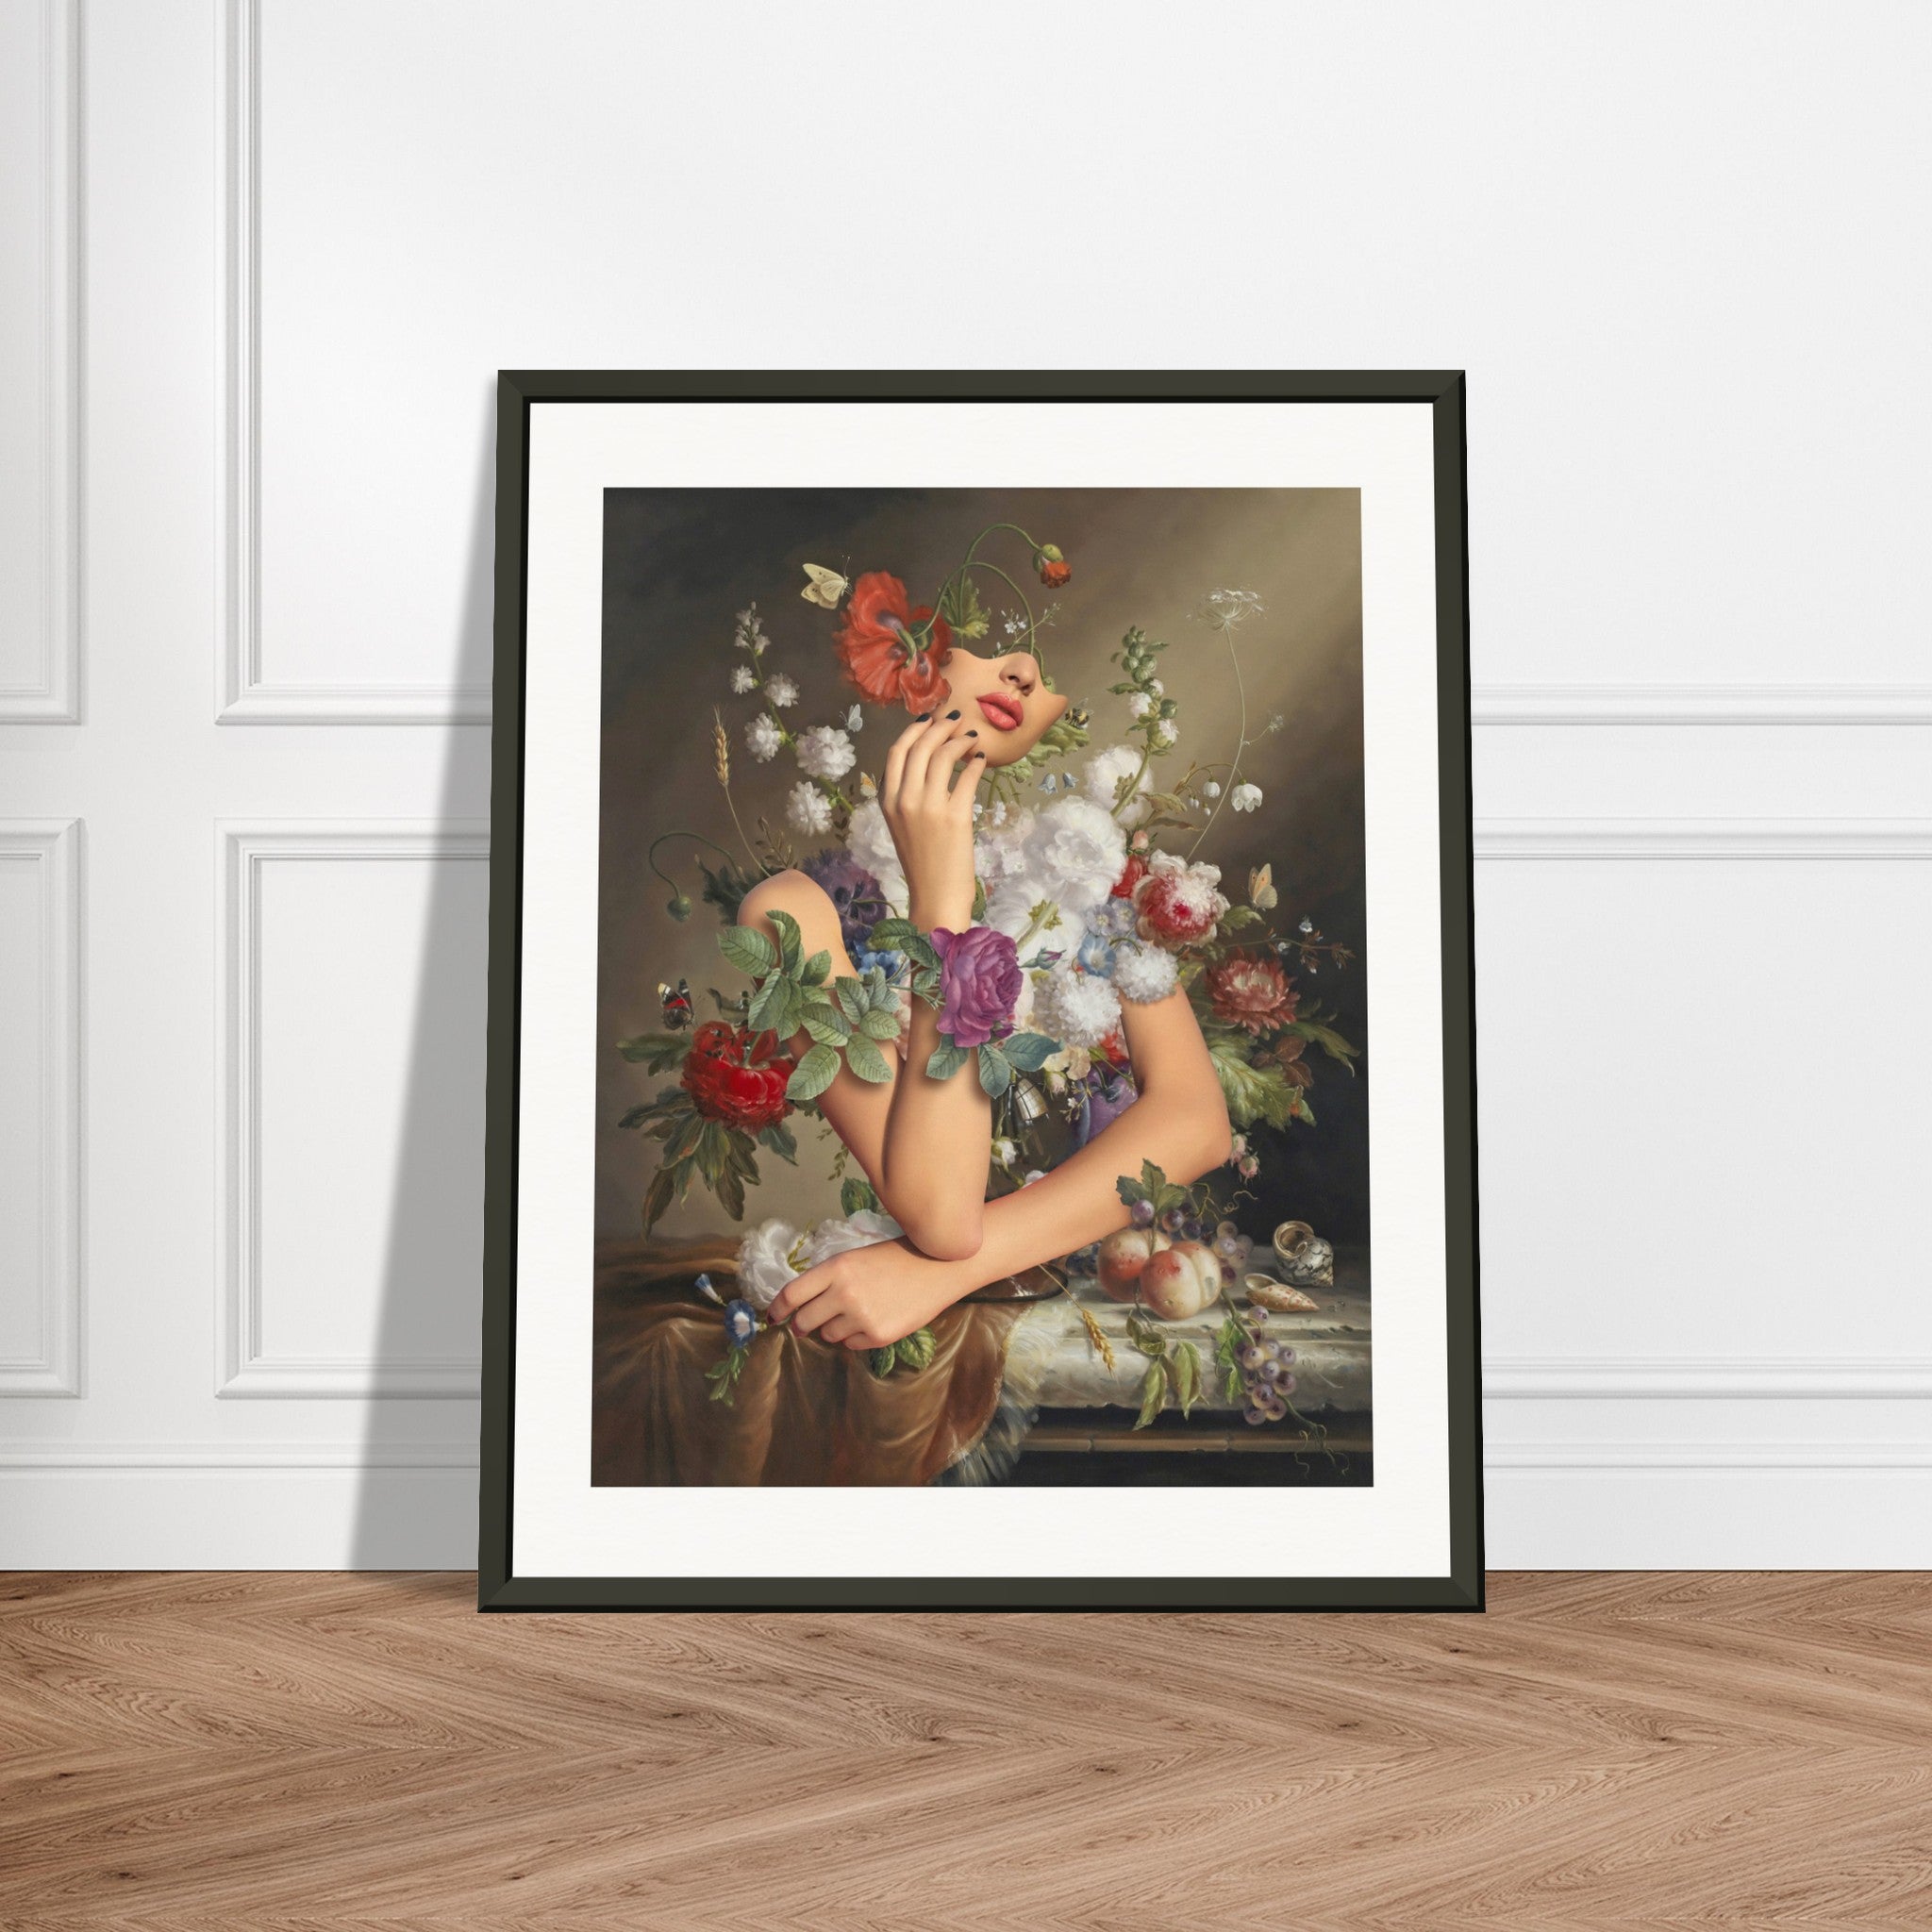 Brought Me There Metal Framed Print